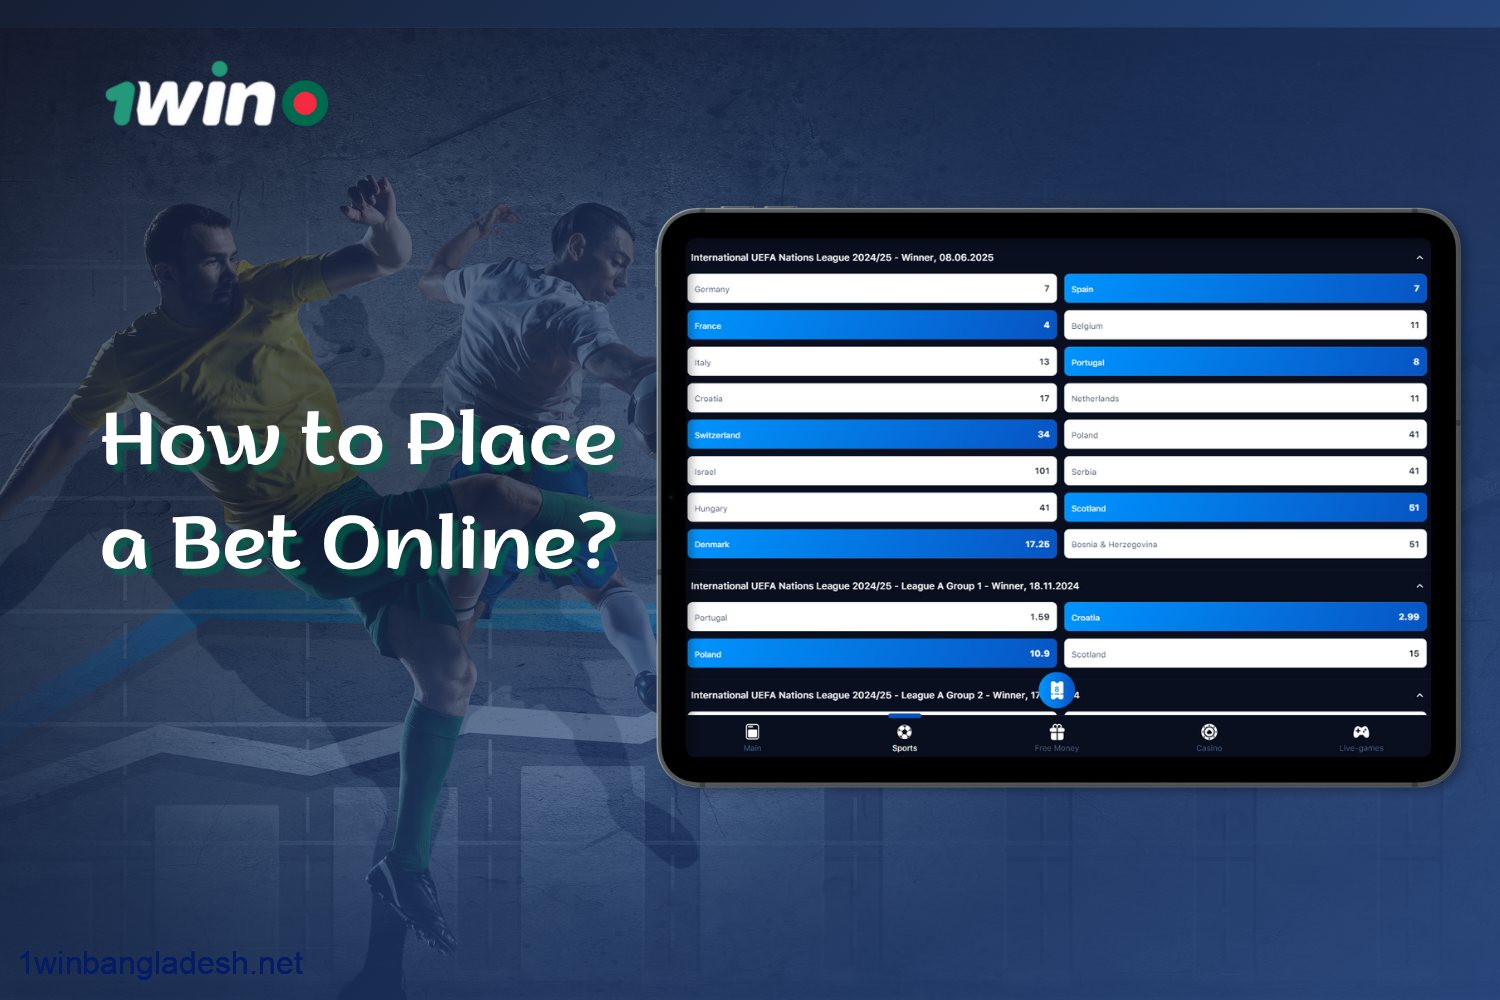 To place an online bet on 1win, a user from Bangladesh should follow a few simple steps